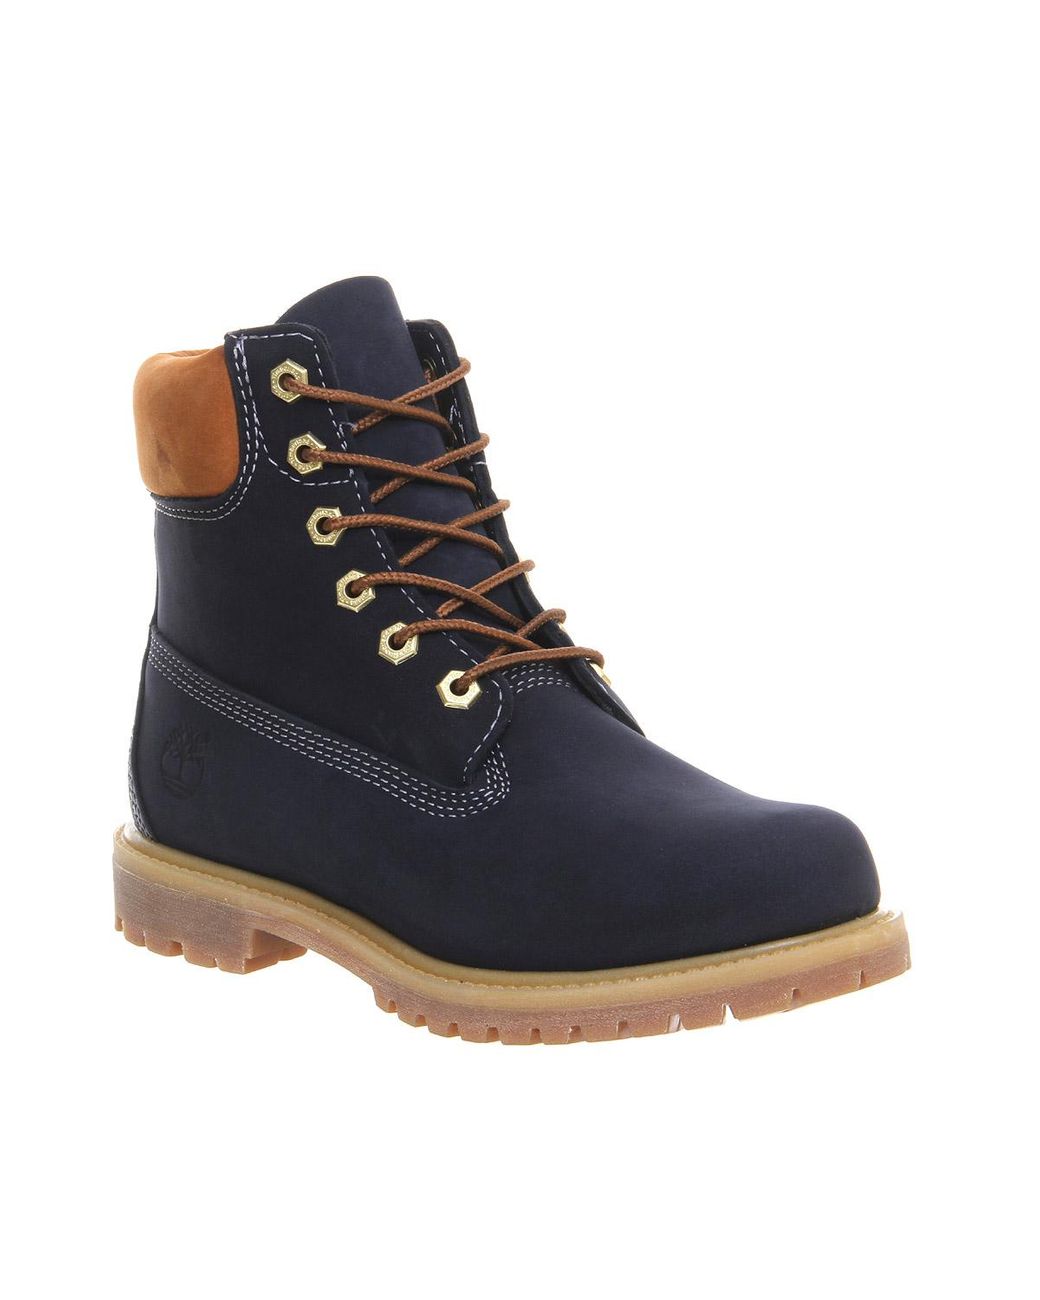 Timberland Leather Premium 6 Boots in Black - Lyst